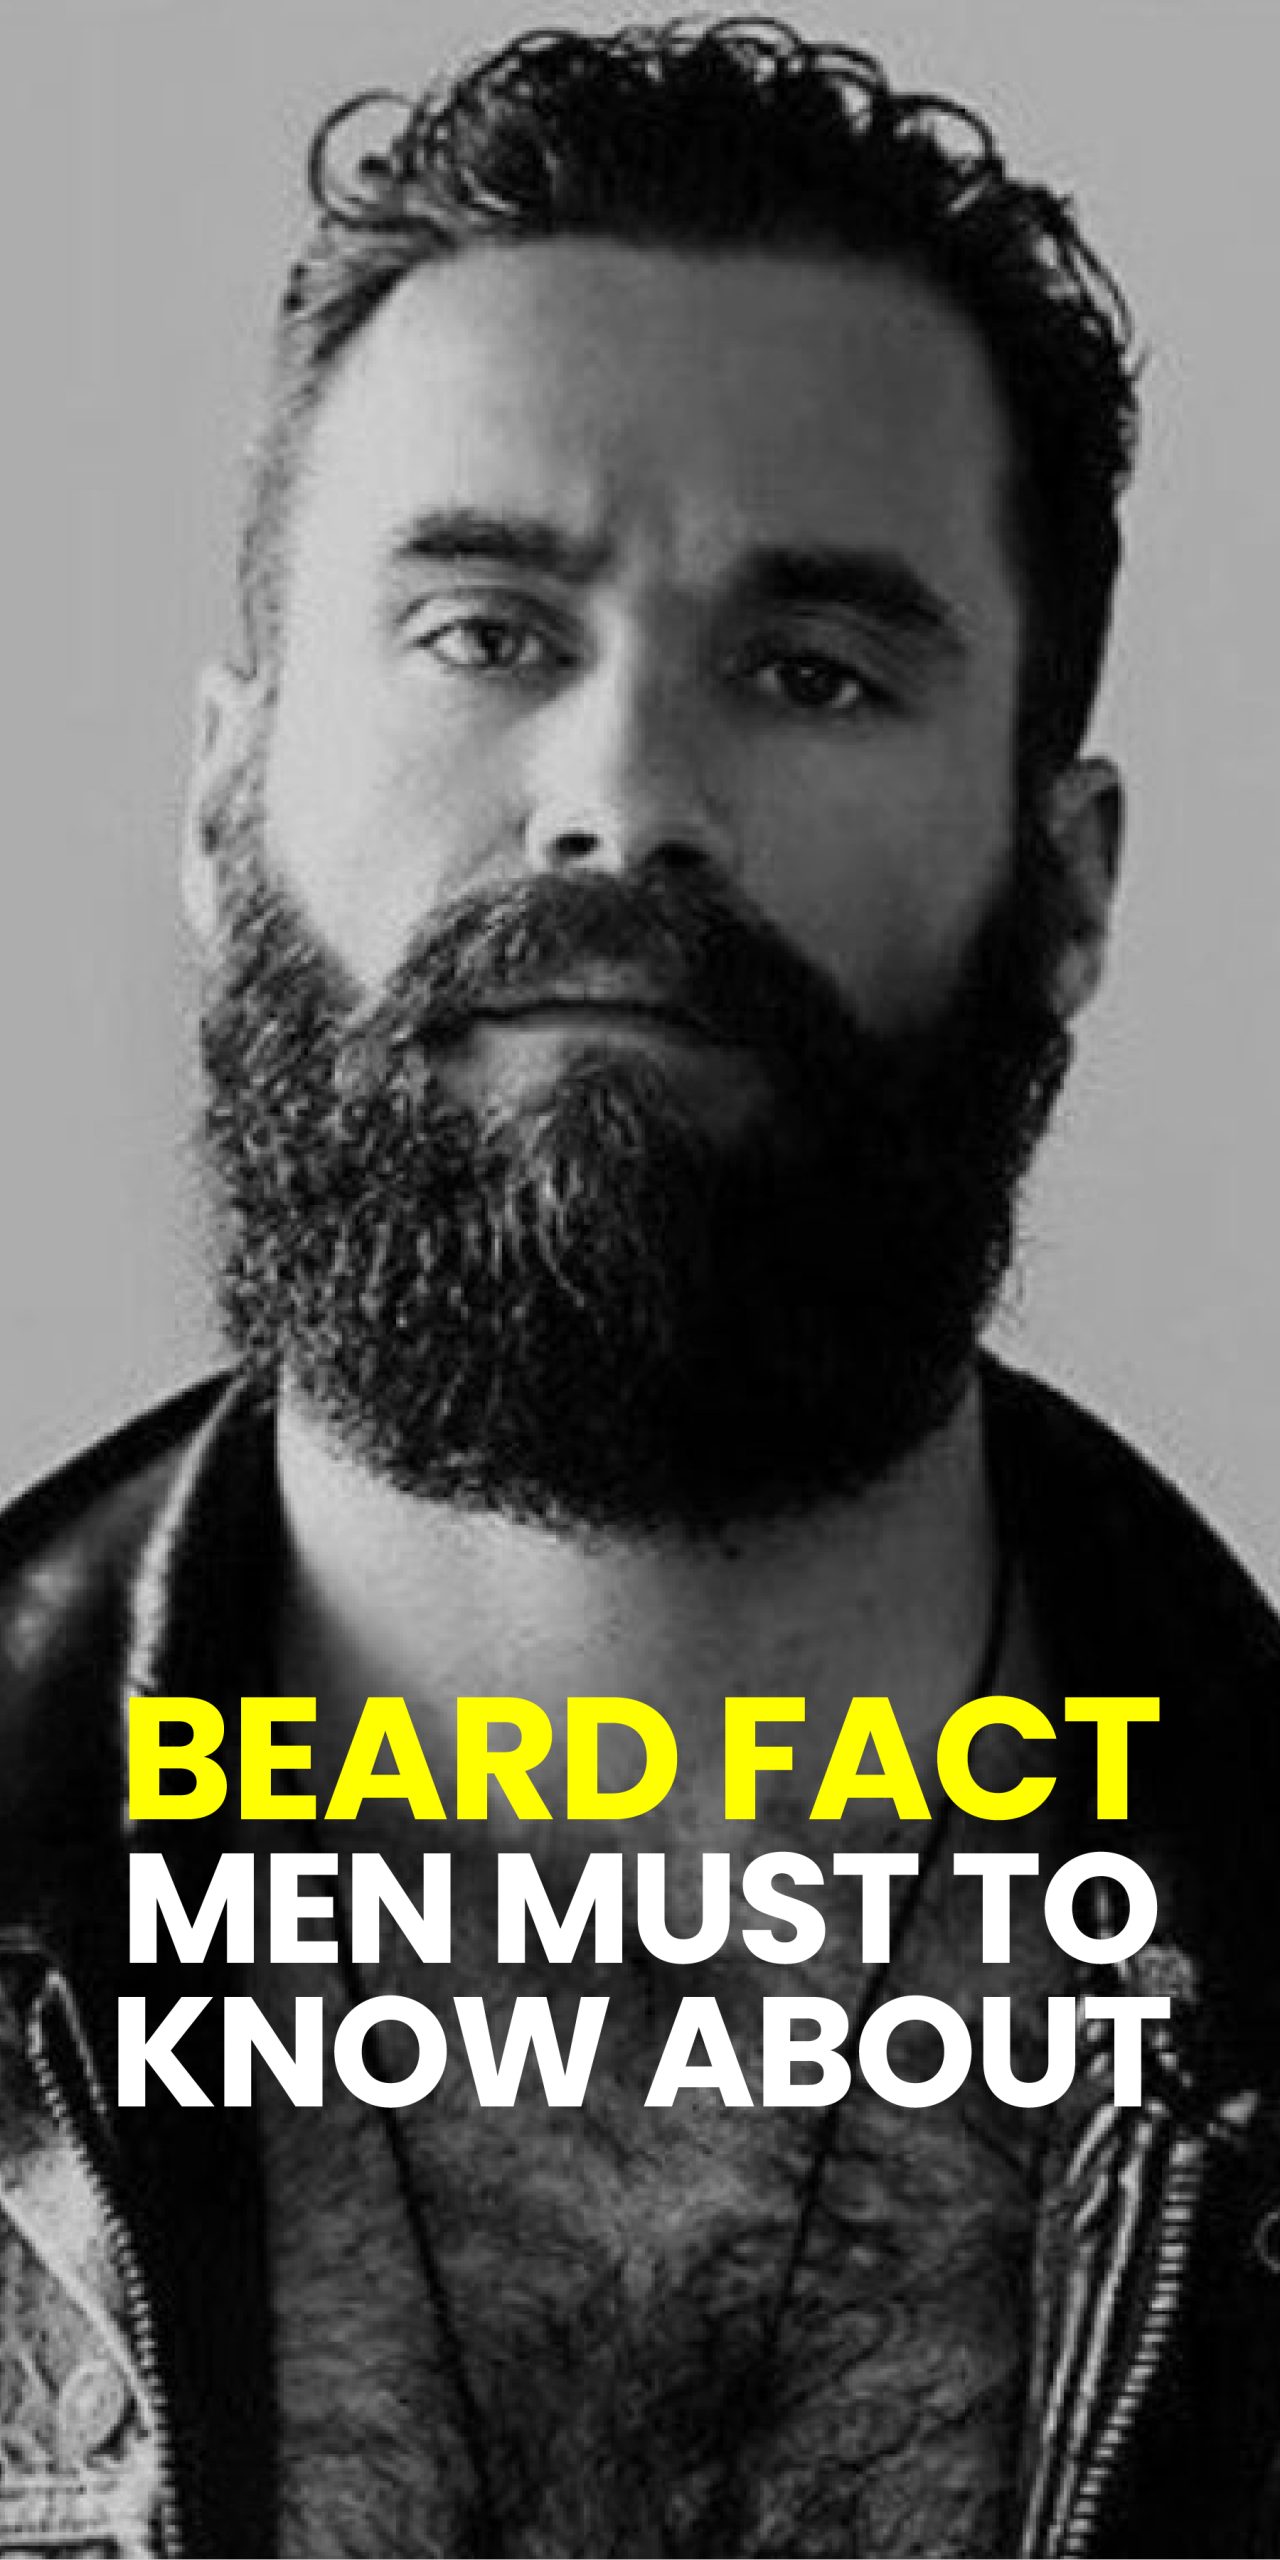 BEARD FACT MEN MUST TO KNOW ABOUT